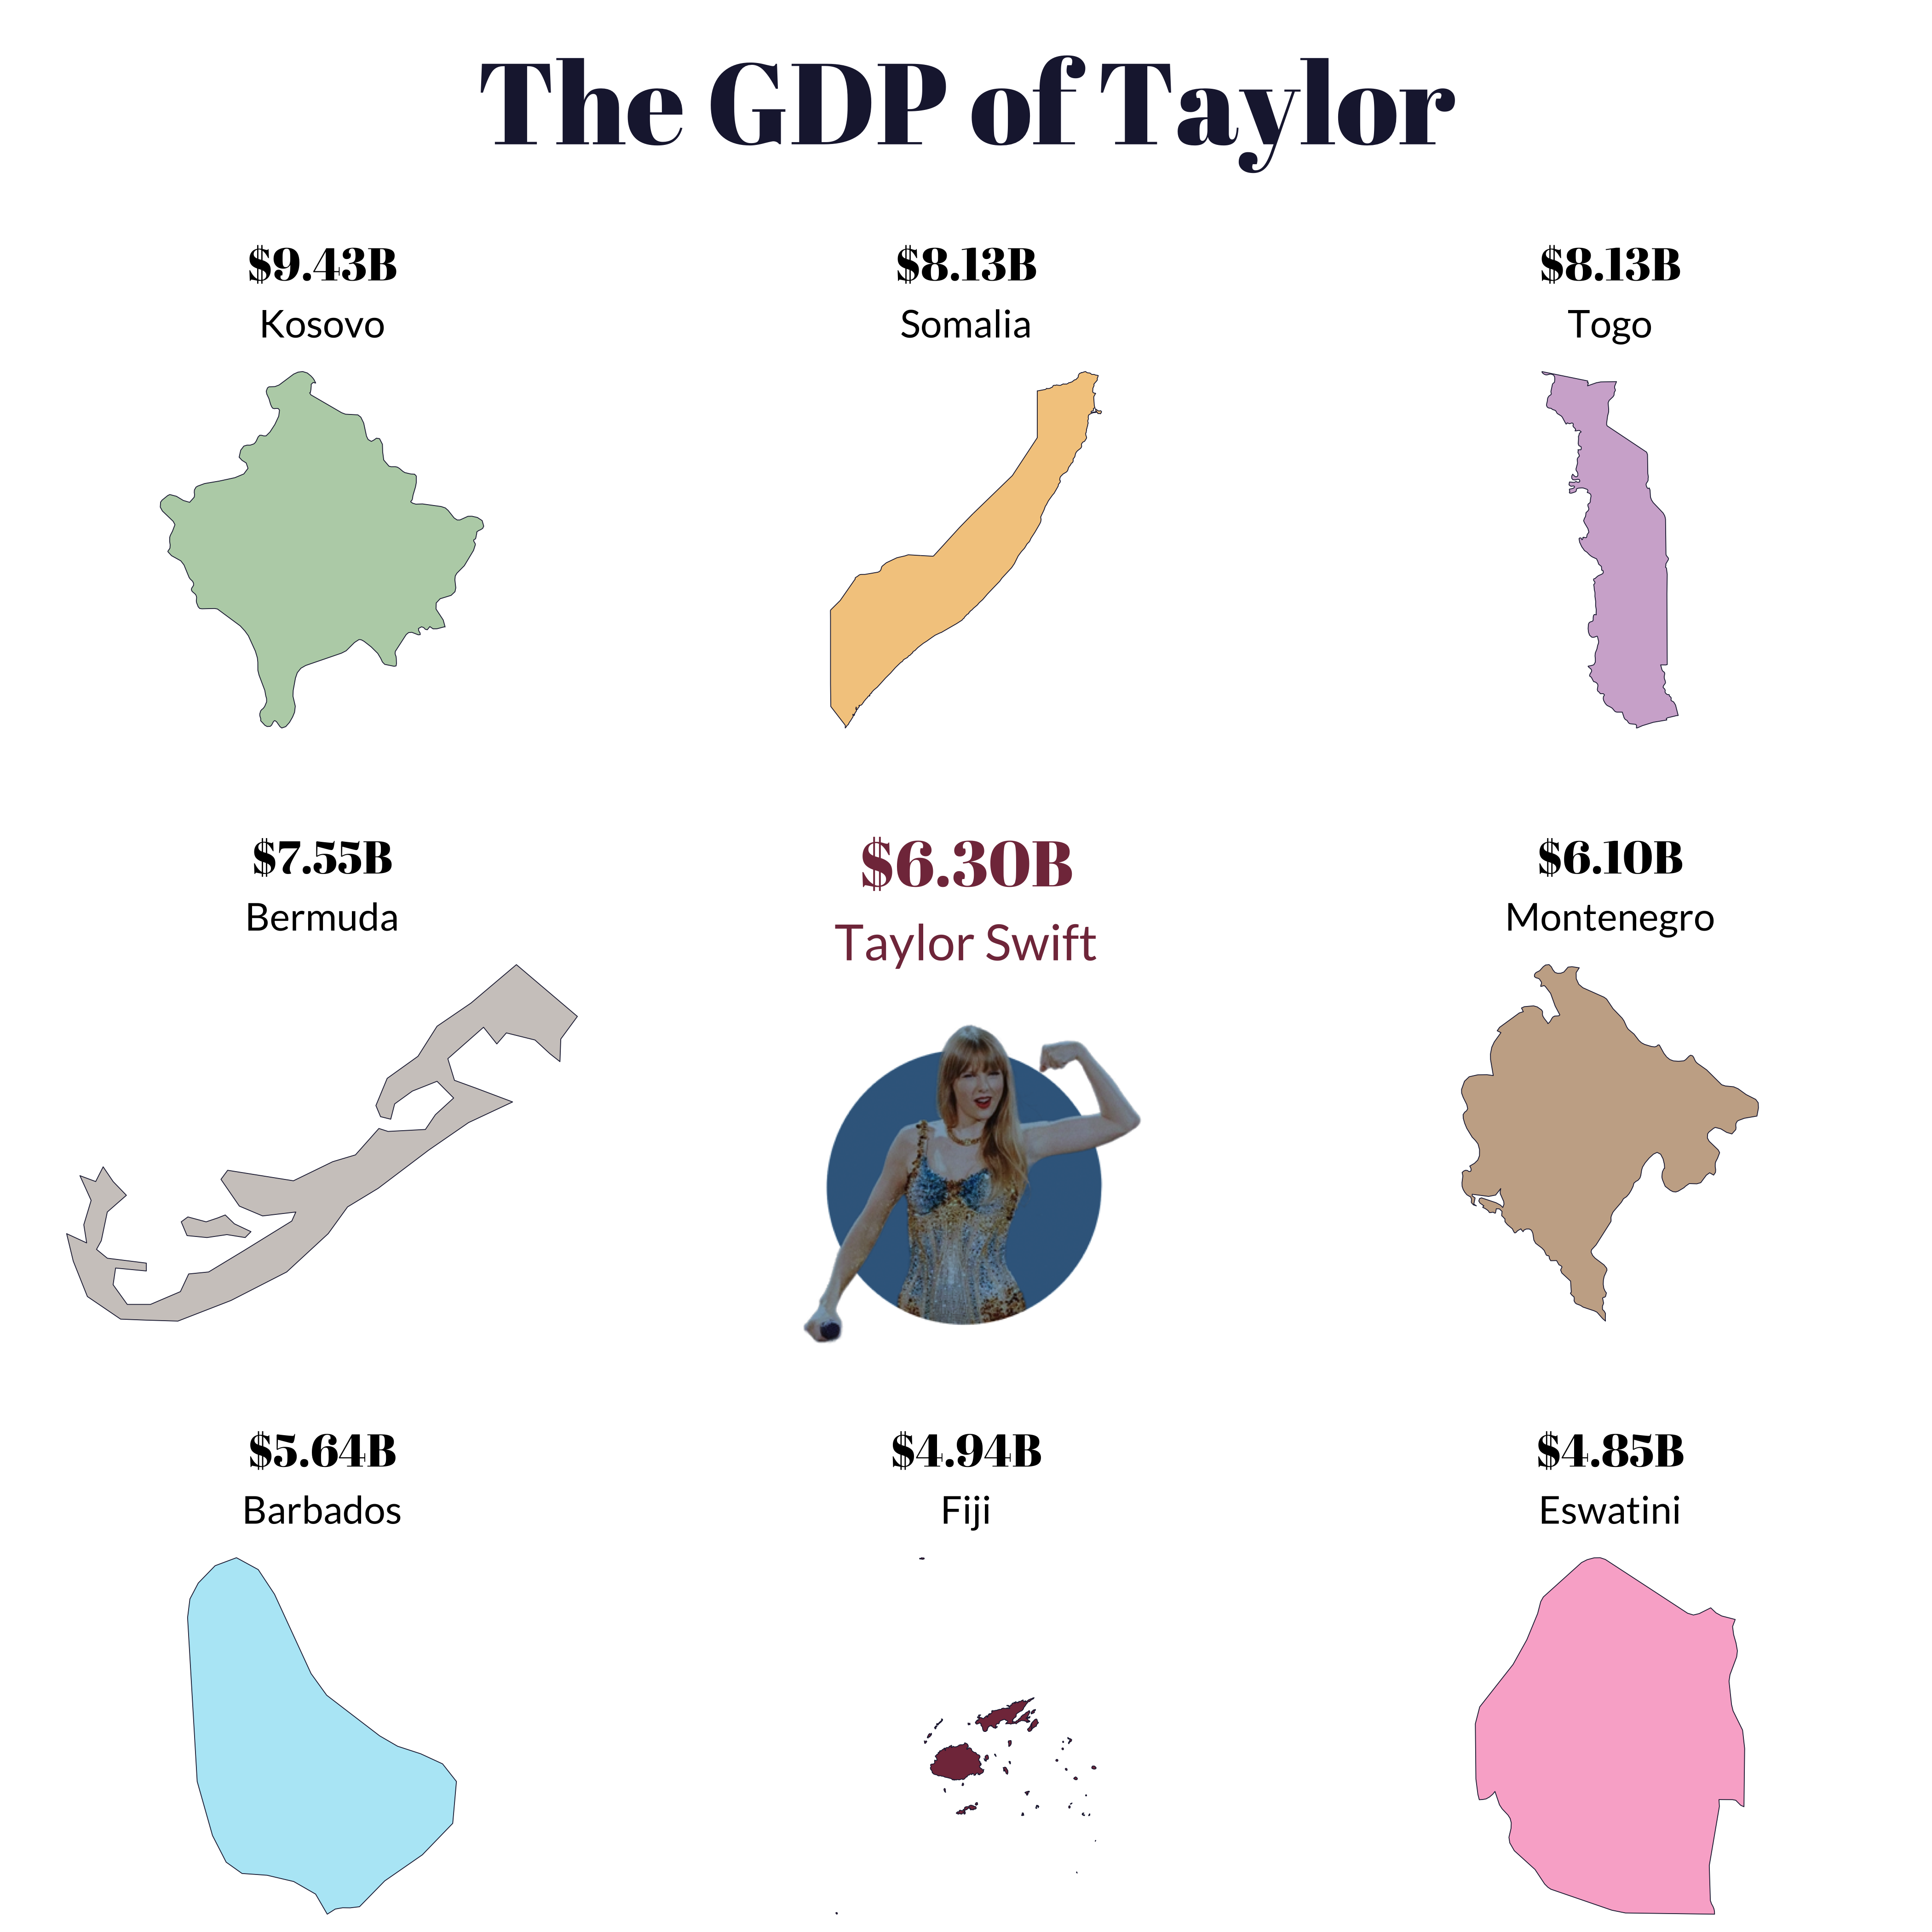 A plot titled The GDP of Taylor. It shows a series of country outlines each with a monetary value labeled as their Gross Domestic Product (GDP), and in the center, there's an image of Taylor Swift with her own GDP value. Starting from the top left and moving clockwise, the countries and their respective GDPs are: Kosovo with $9.43B, Somalia with $8.13B, Togo with $8.13B, Montenegro with $6.10B, Eswatini with $4.85B, Fiji with $4.94B, Barbados with $5.64B, and Bermuda with $7.55B. Taylor Swift is in the center with a GDP of $6.30B. Each country is represented by a colored silhouette in various shades of green, yellow, purple, and pink. Taylor Swift's image is in a blue circle, and she is depicted with blond hair, wearing a sparkling dress, and posing with one hand on her hip.